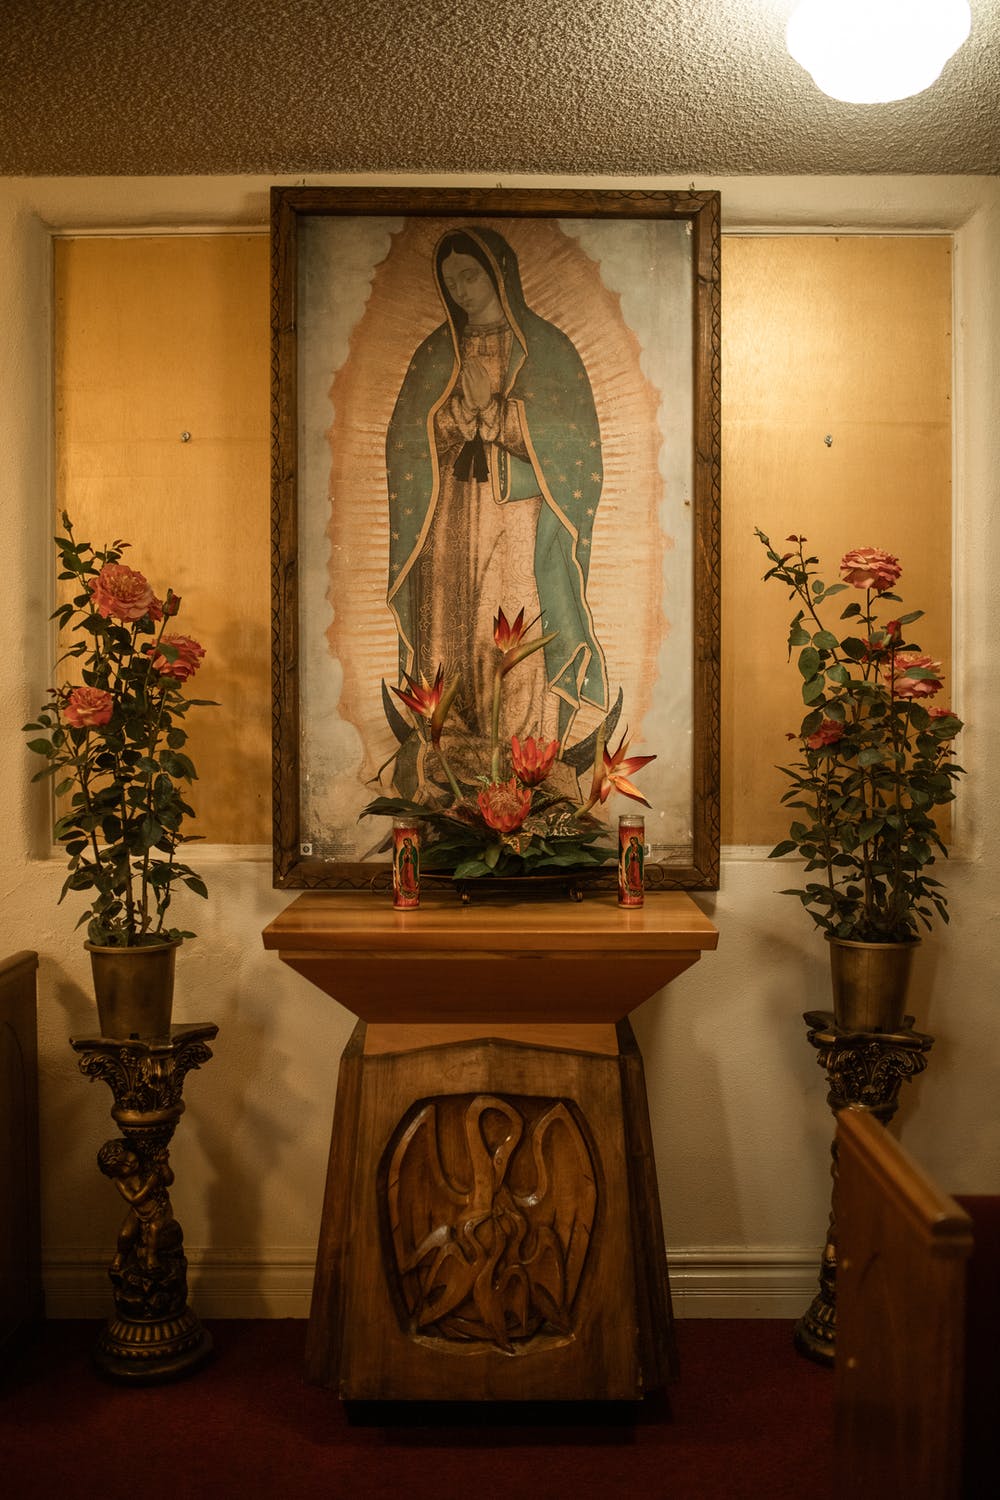 To Our Lady of Guadalupe